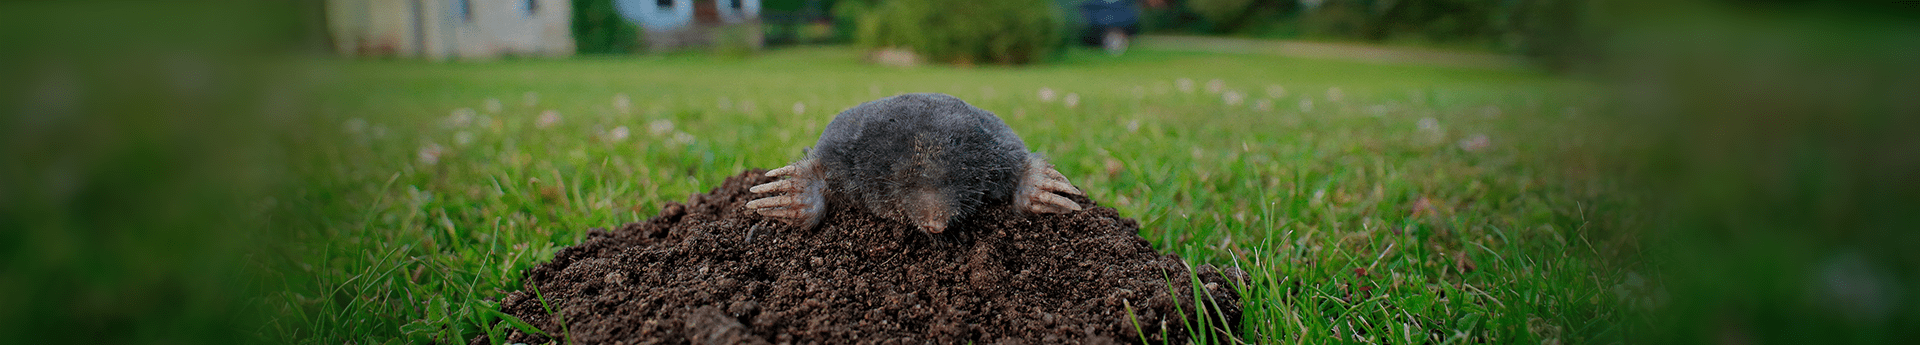 mole looking out of its hole